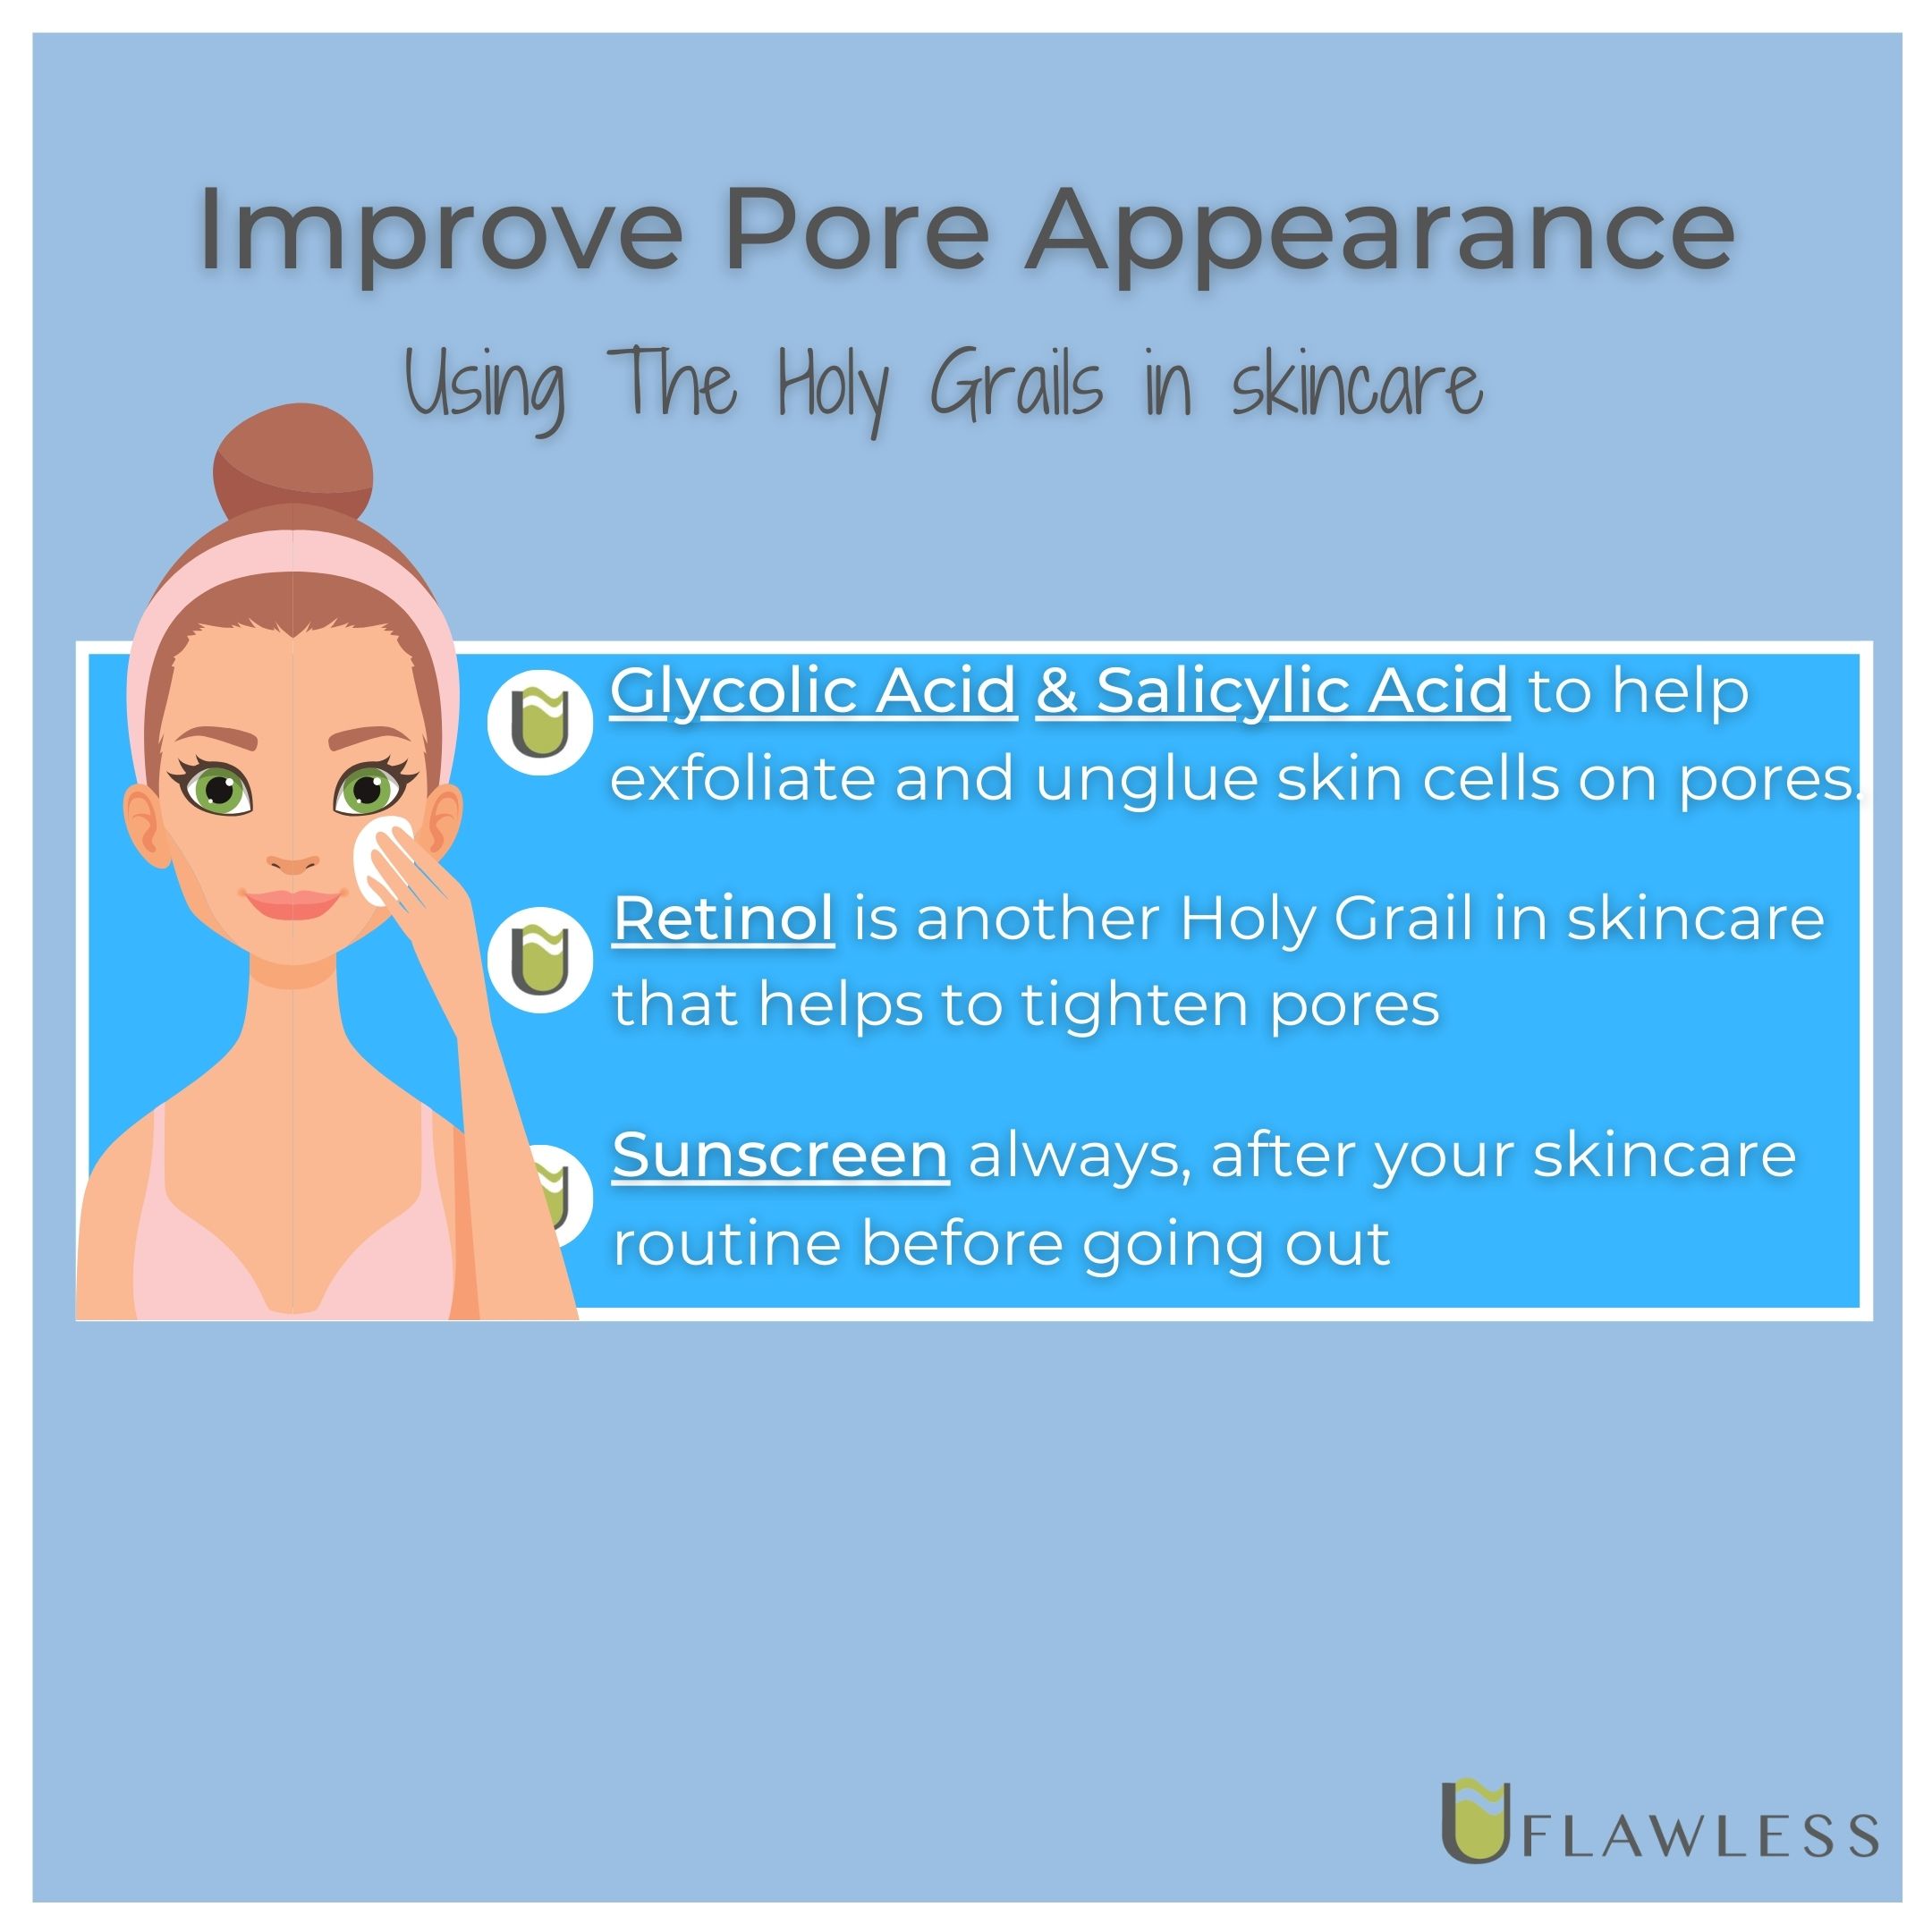 Improve pore appearance with salicylic acid, glycolic acid, and sunscreen